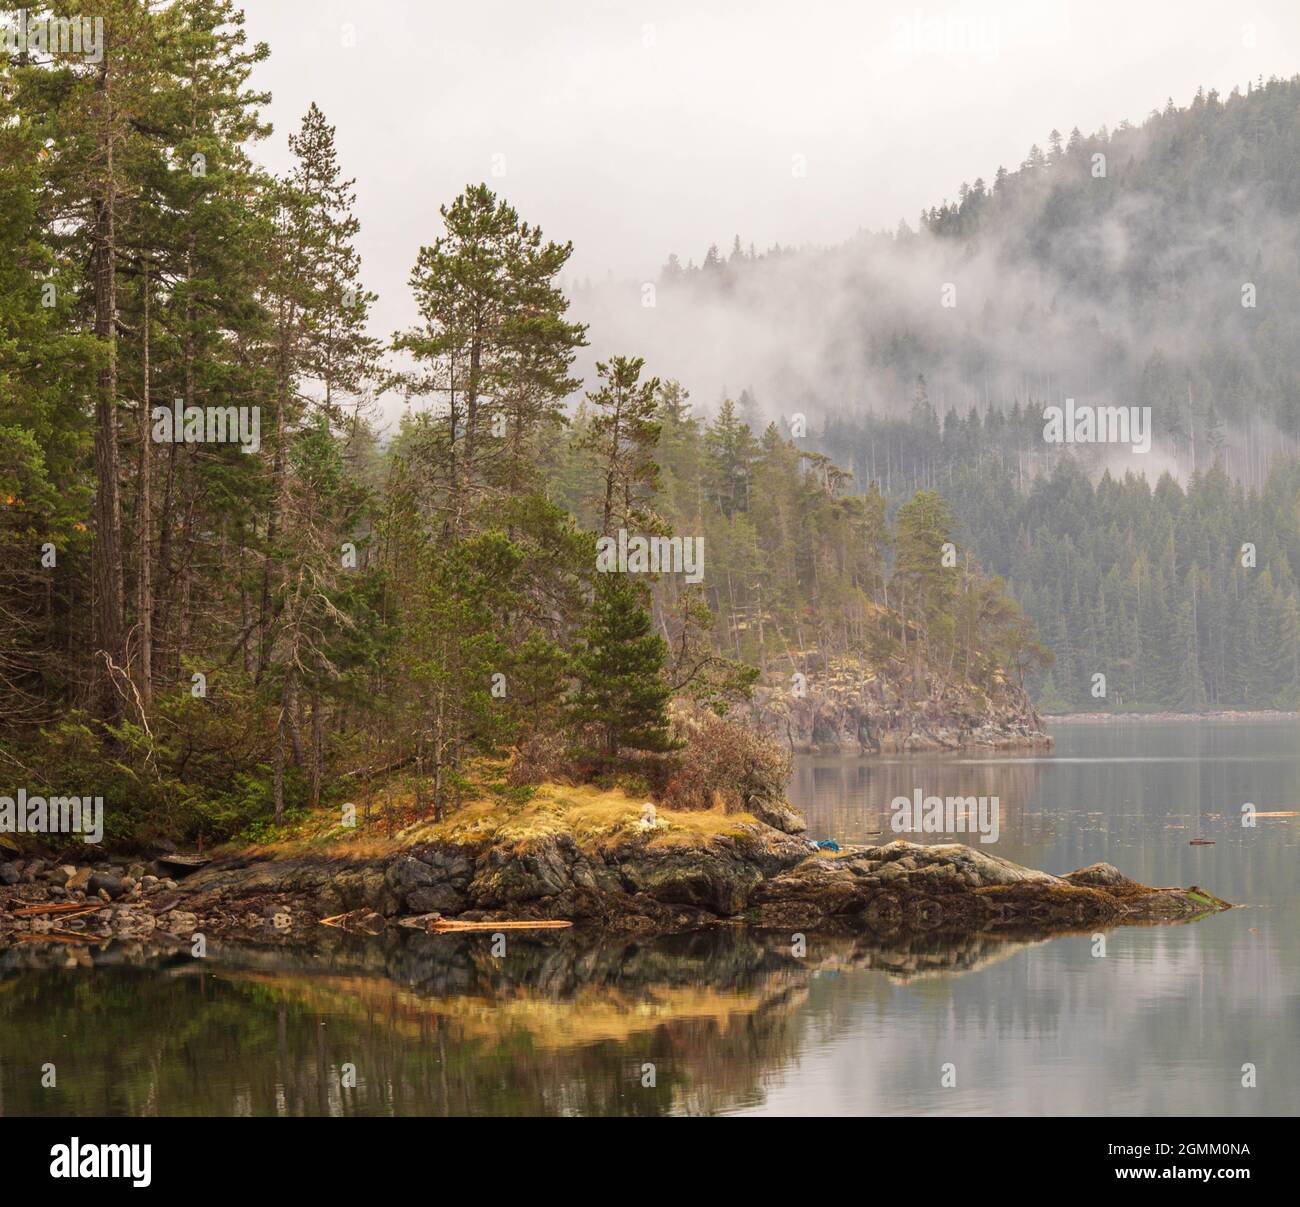 Misty day on the BC coast in Canada, with clouds, islands, calm water, conifers and rocky shoreline.  Wilderness, remote, picturesque. Stock Photo